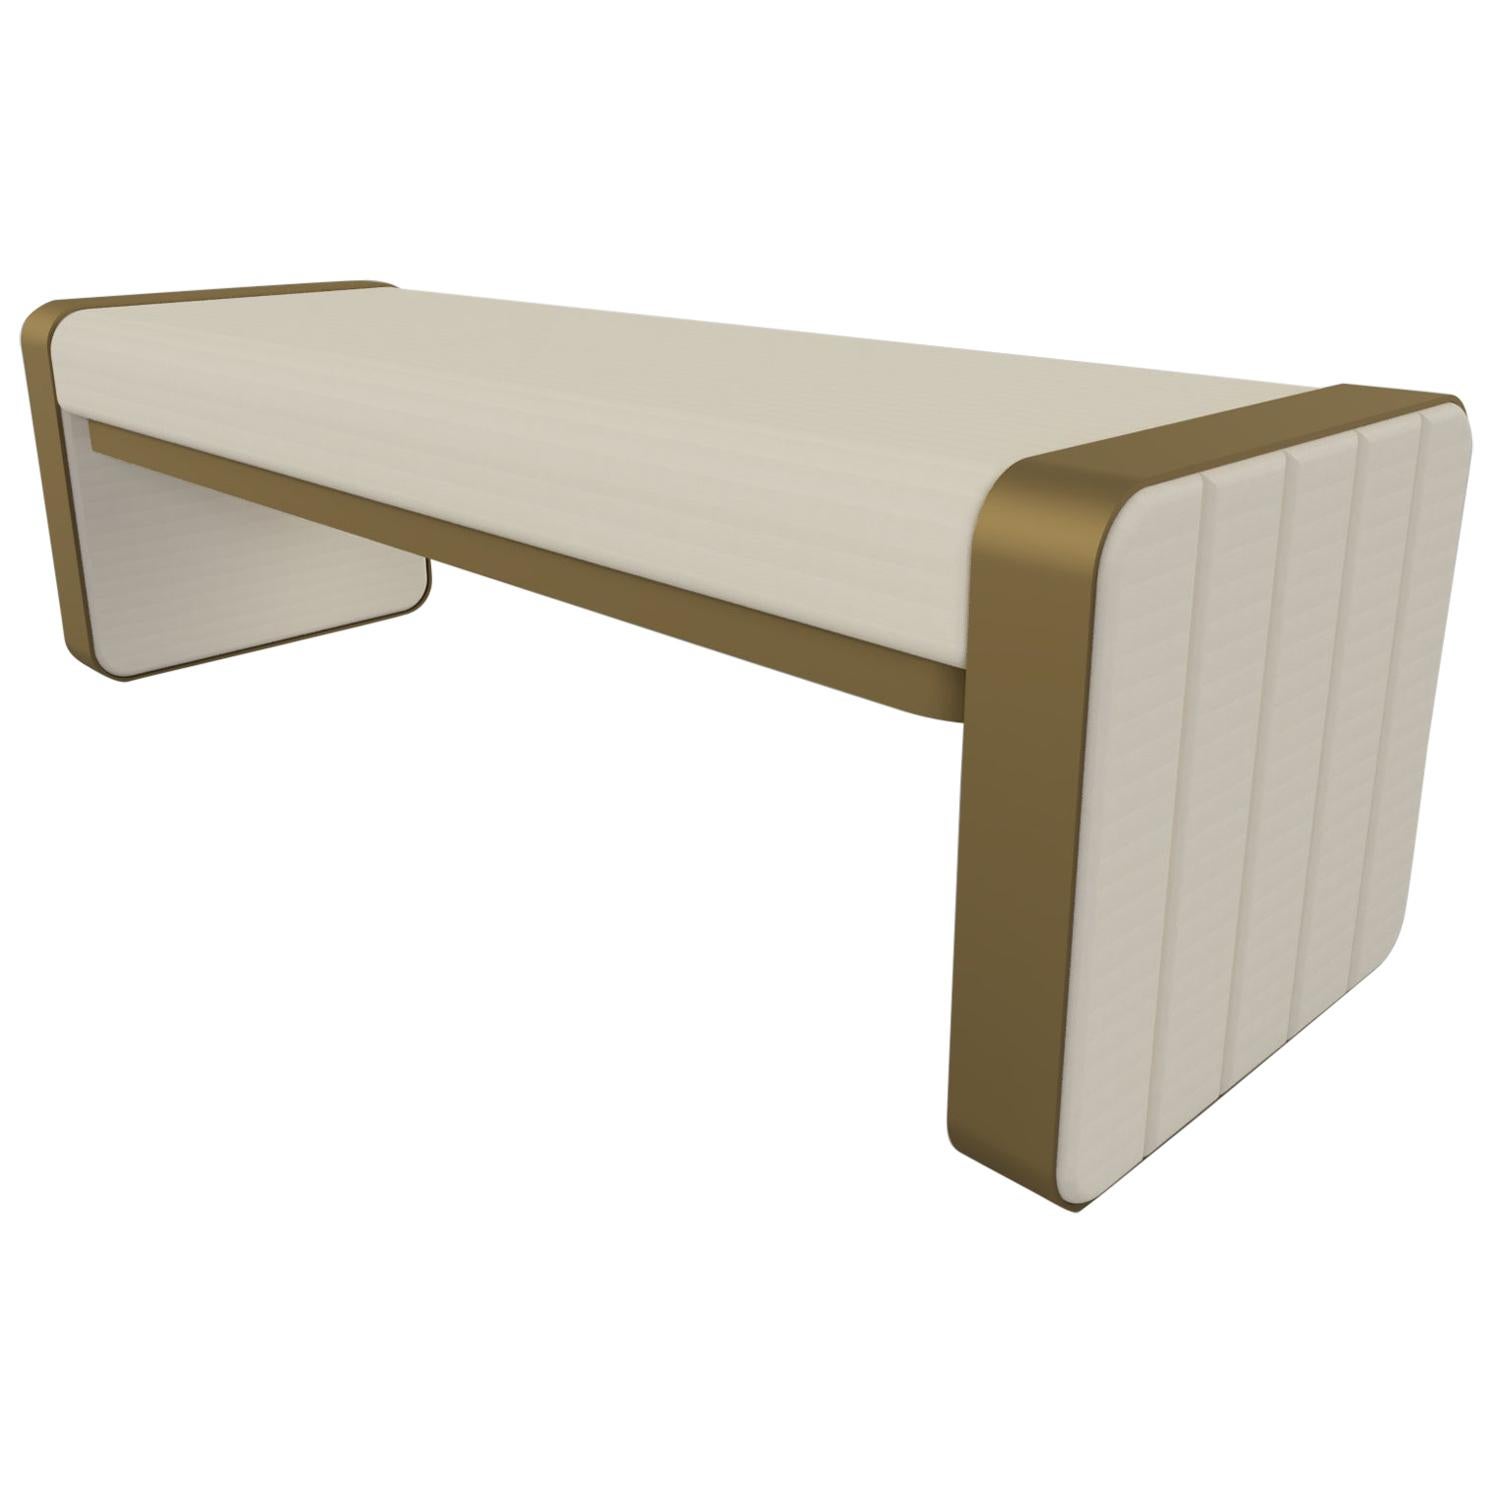 Somnus Bench with Flute Detailing in Ivory Boucle and Antique Brass Tint